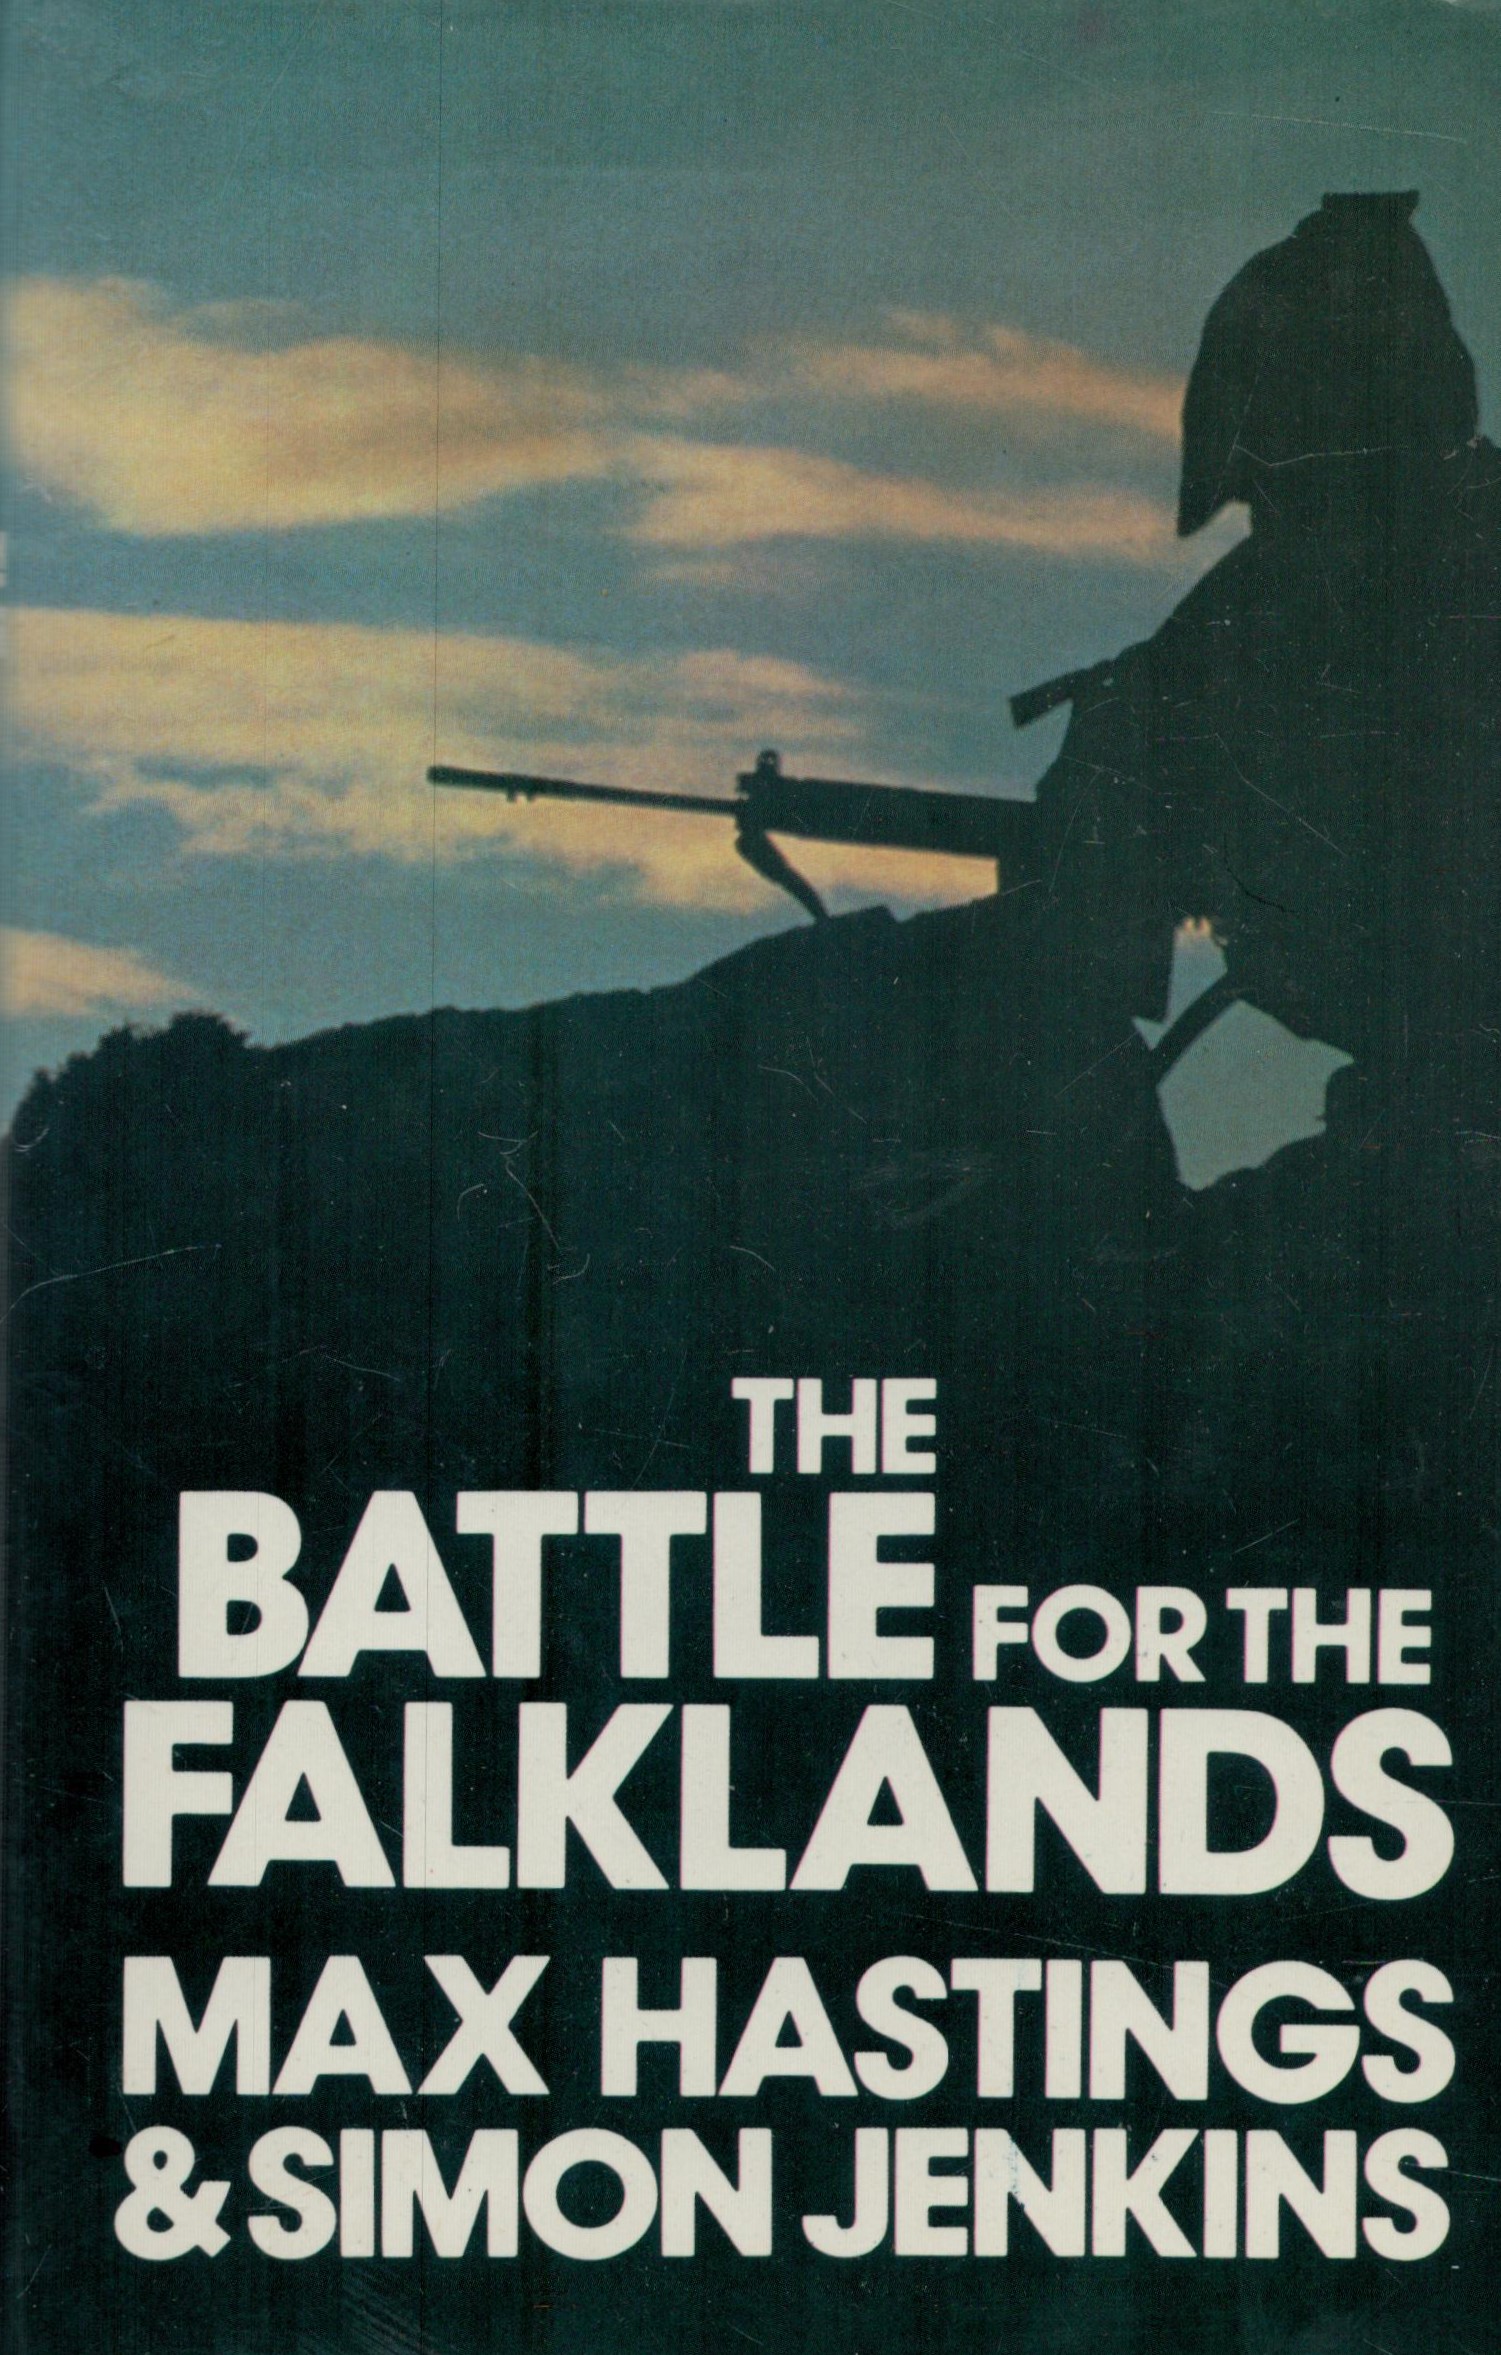 The Battle for the Falklands by Max Hastings & Simon Jenkins 1983 Book Club Edition Hardback Book - Image 3 of 9